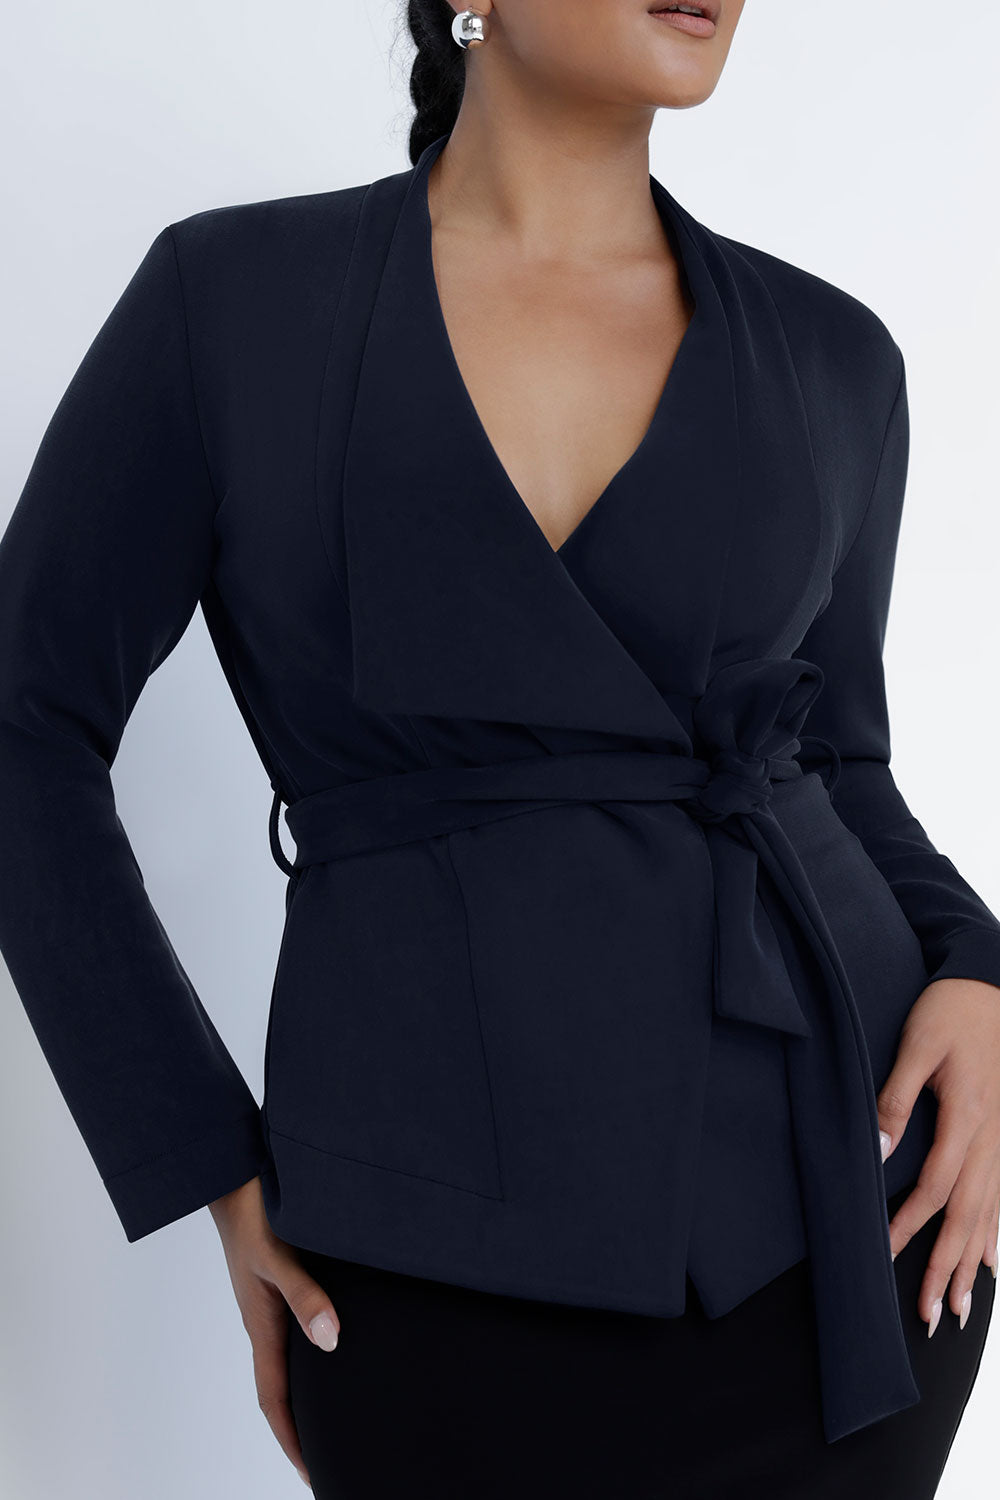 A size 10 woman wears the Lyndon Jacket in Bluestone. A wrap style jacket with waist belt and collared neckline. Made in soft luxurios modal. Rug up on the way to the office or weekend winter get away. Made in Australia for women size 8 -24.